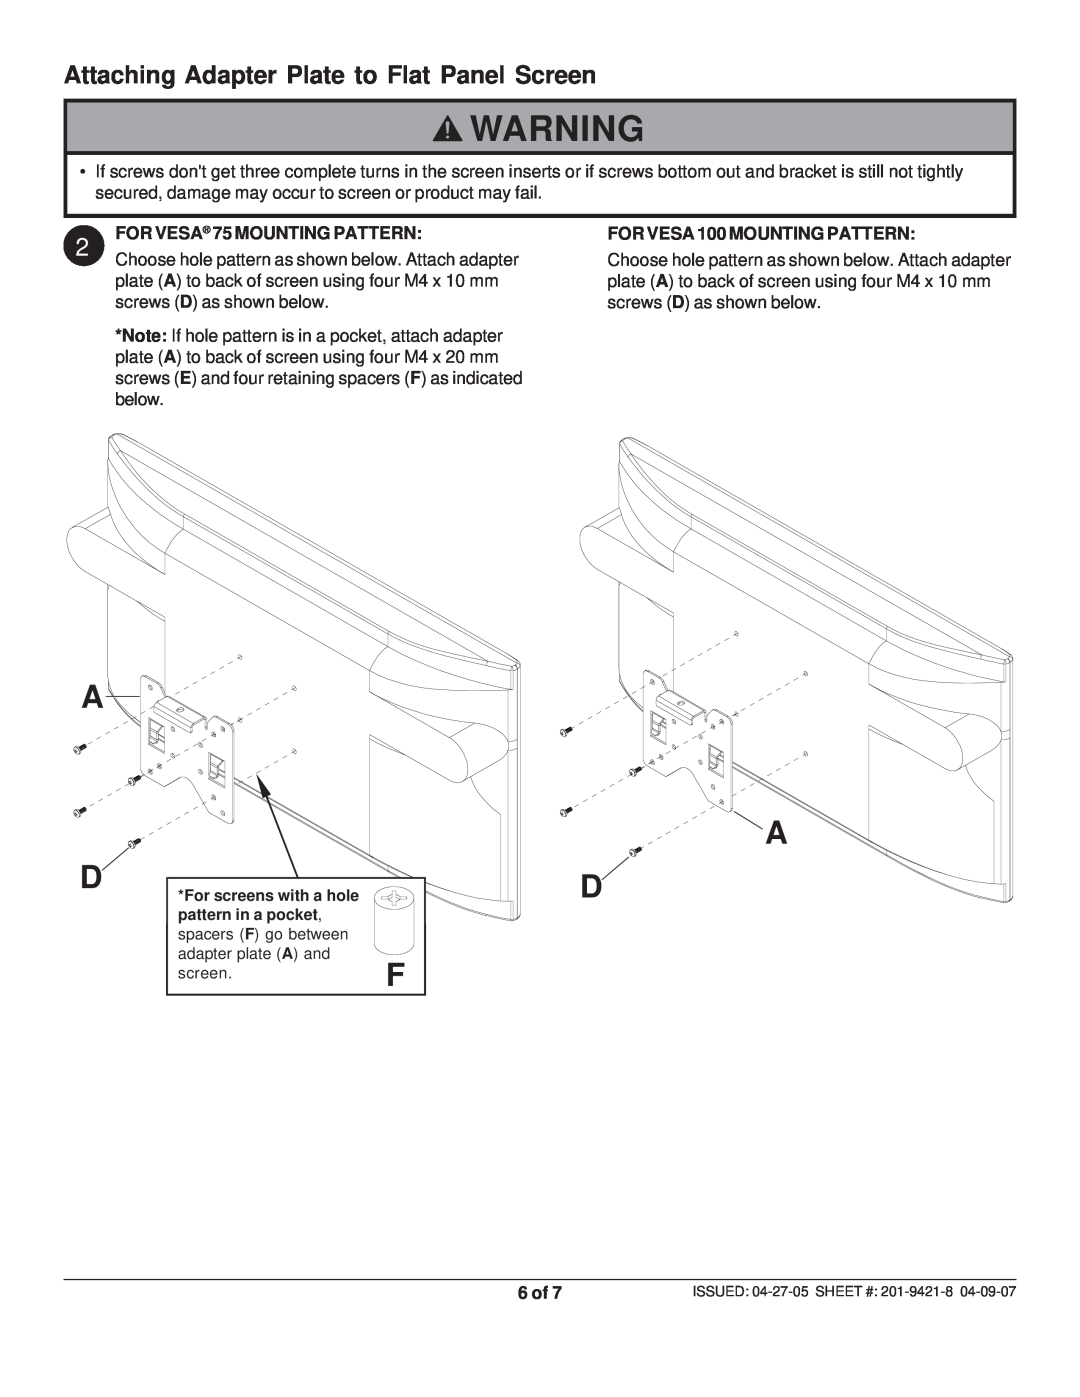 Peerless Industries ST 630P-S manual Attaching Adapter Plate to Flat Panel Screen, FOR VESA 75 MOUNTING PATTERN, 6 of 